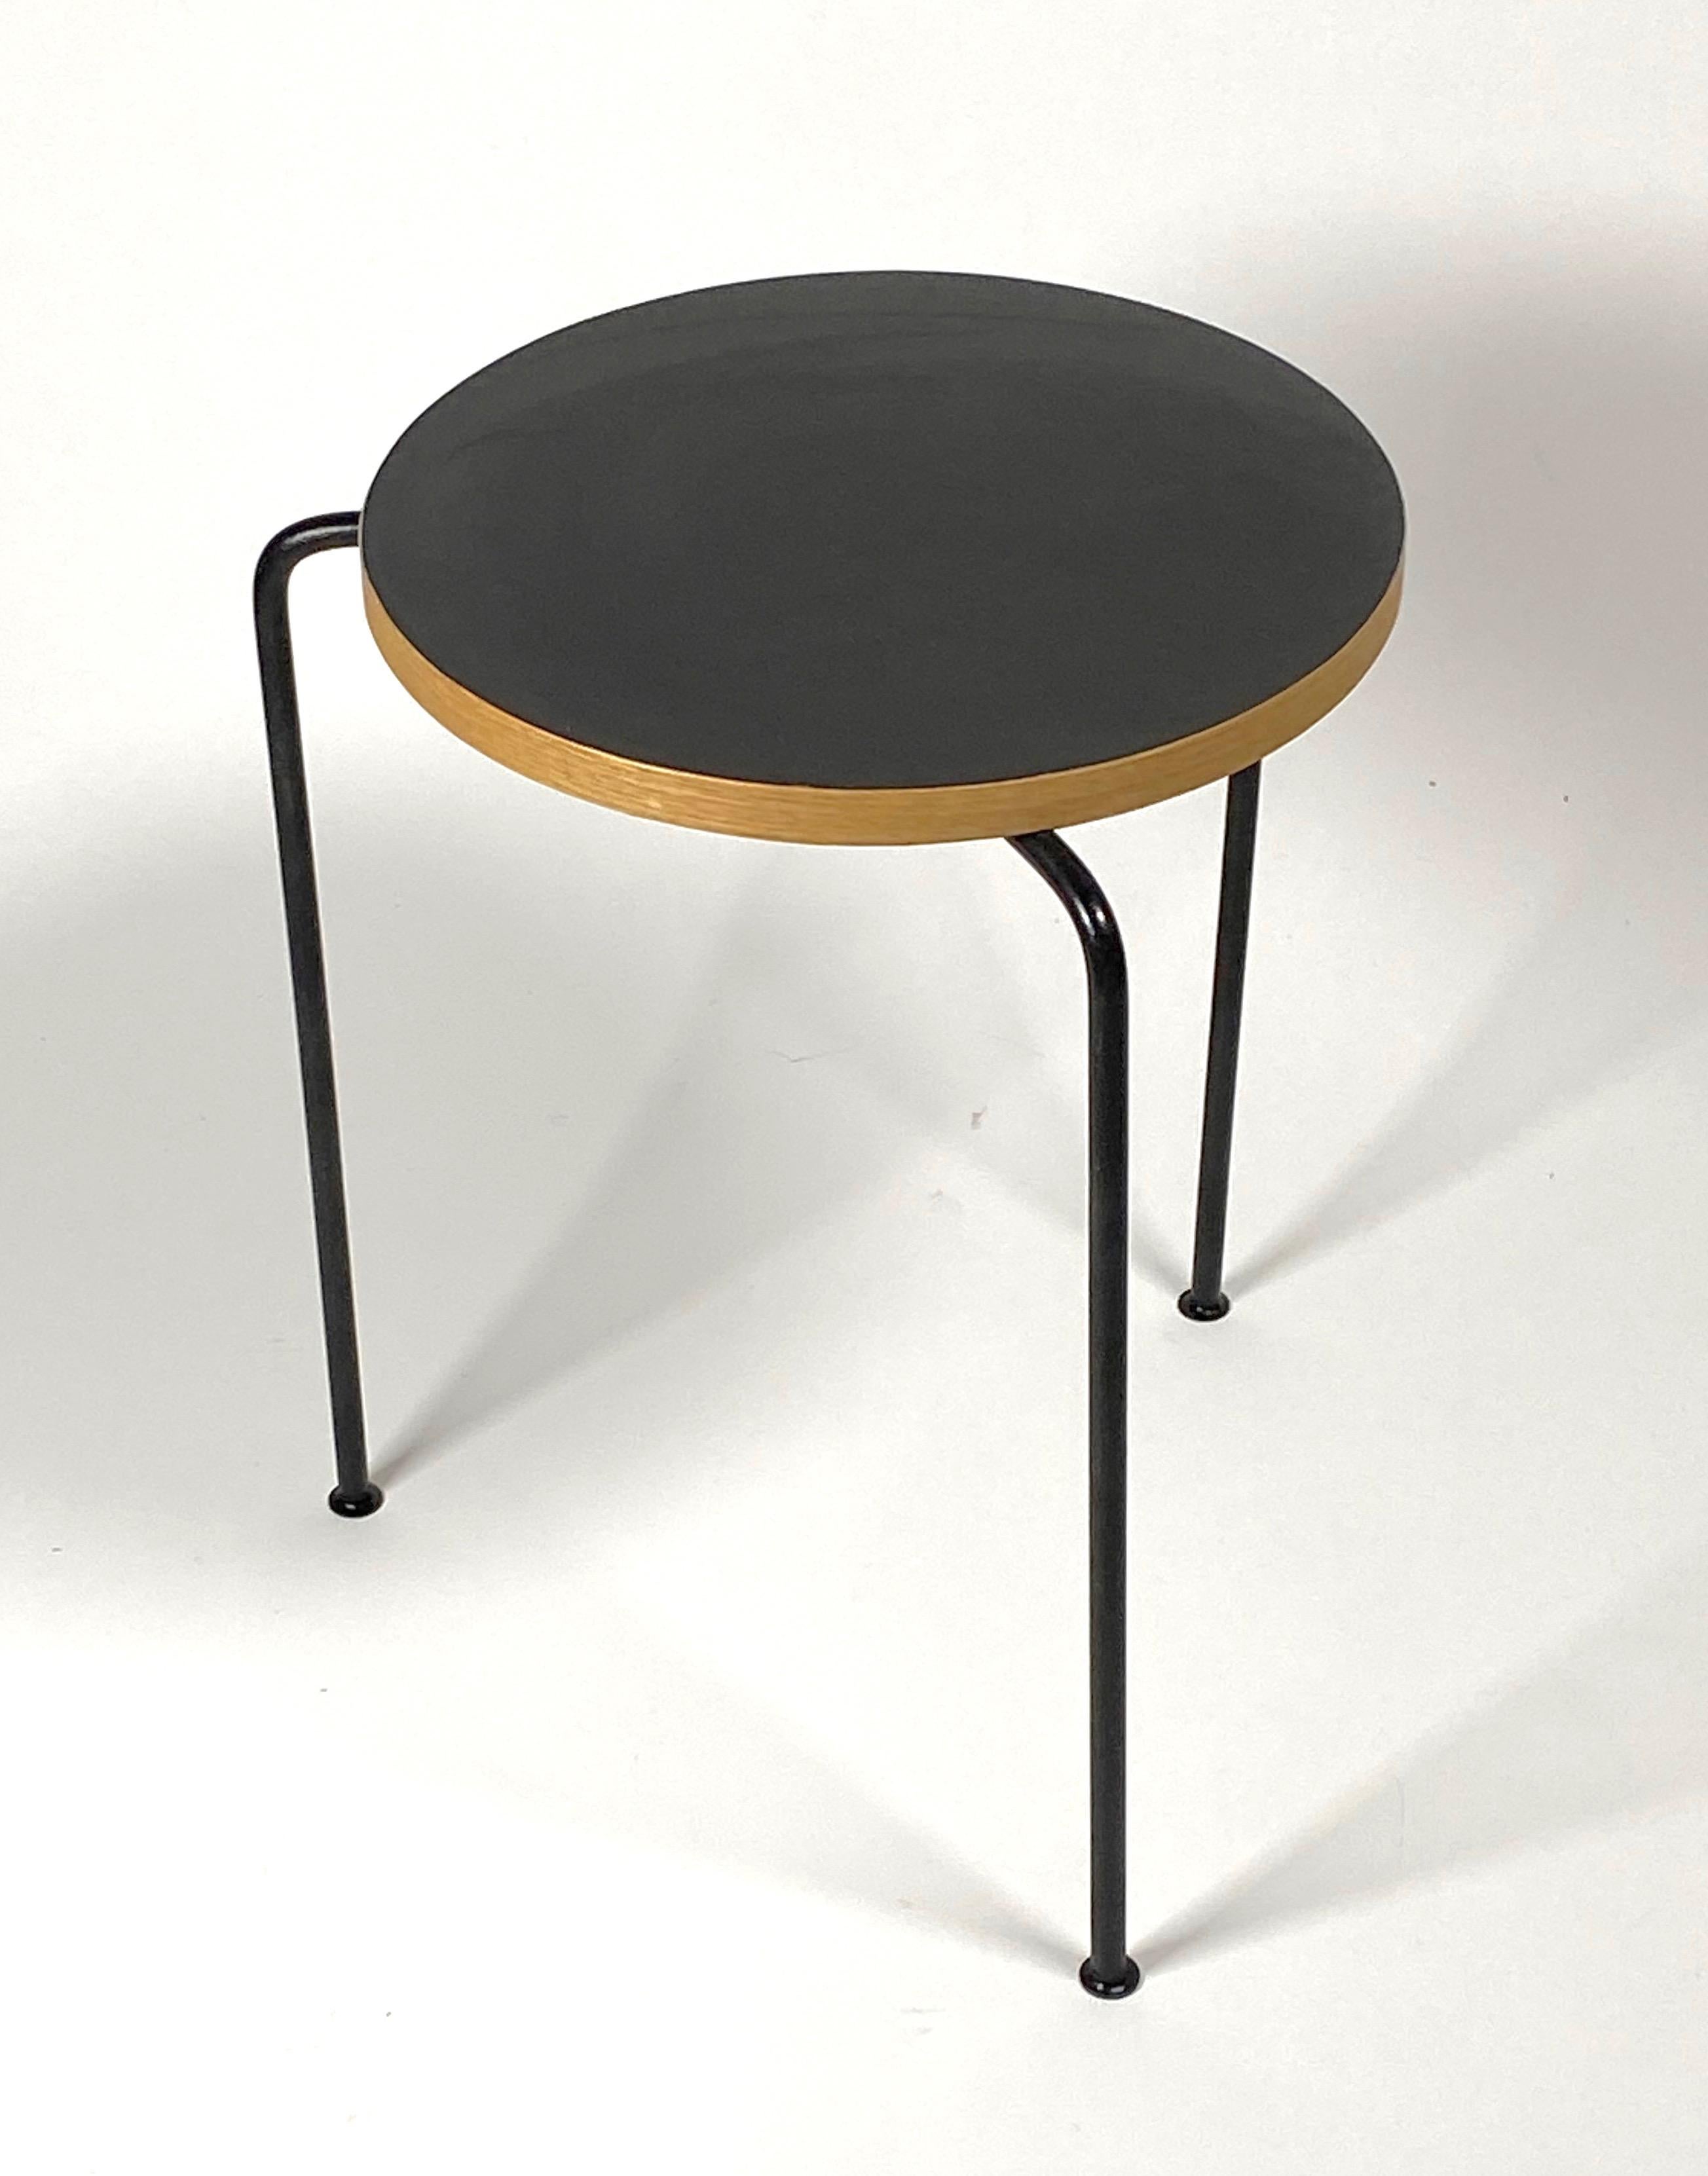 Melamine laminate, wood and iron frame stool, this three legged stool is attributed to Bay Area designer Luther Conover, normally the stools are constructed using Philippine Mahogany for the tops, the laminate is a unusual variation on this design.